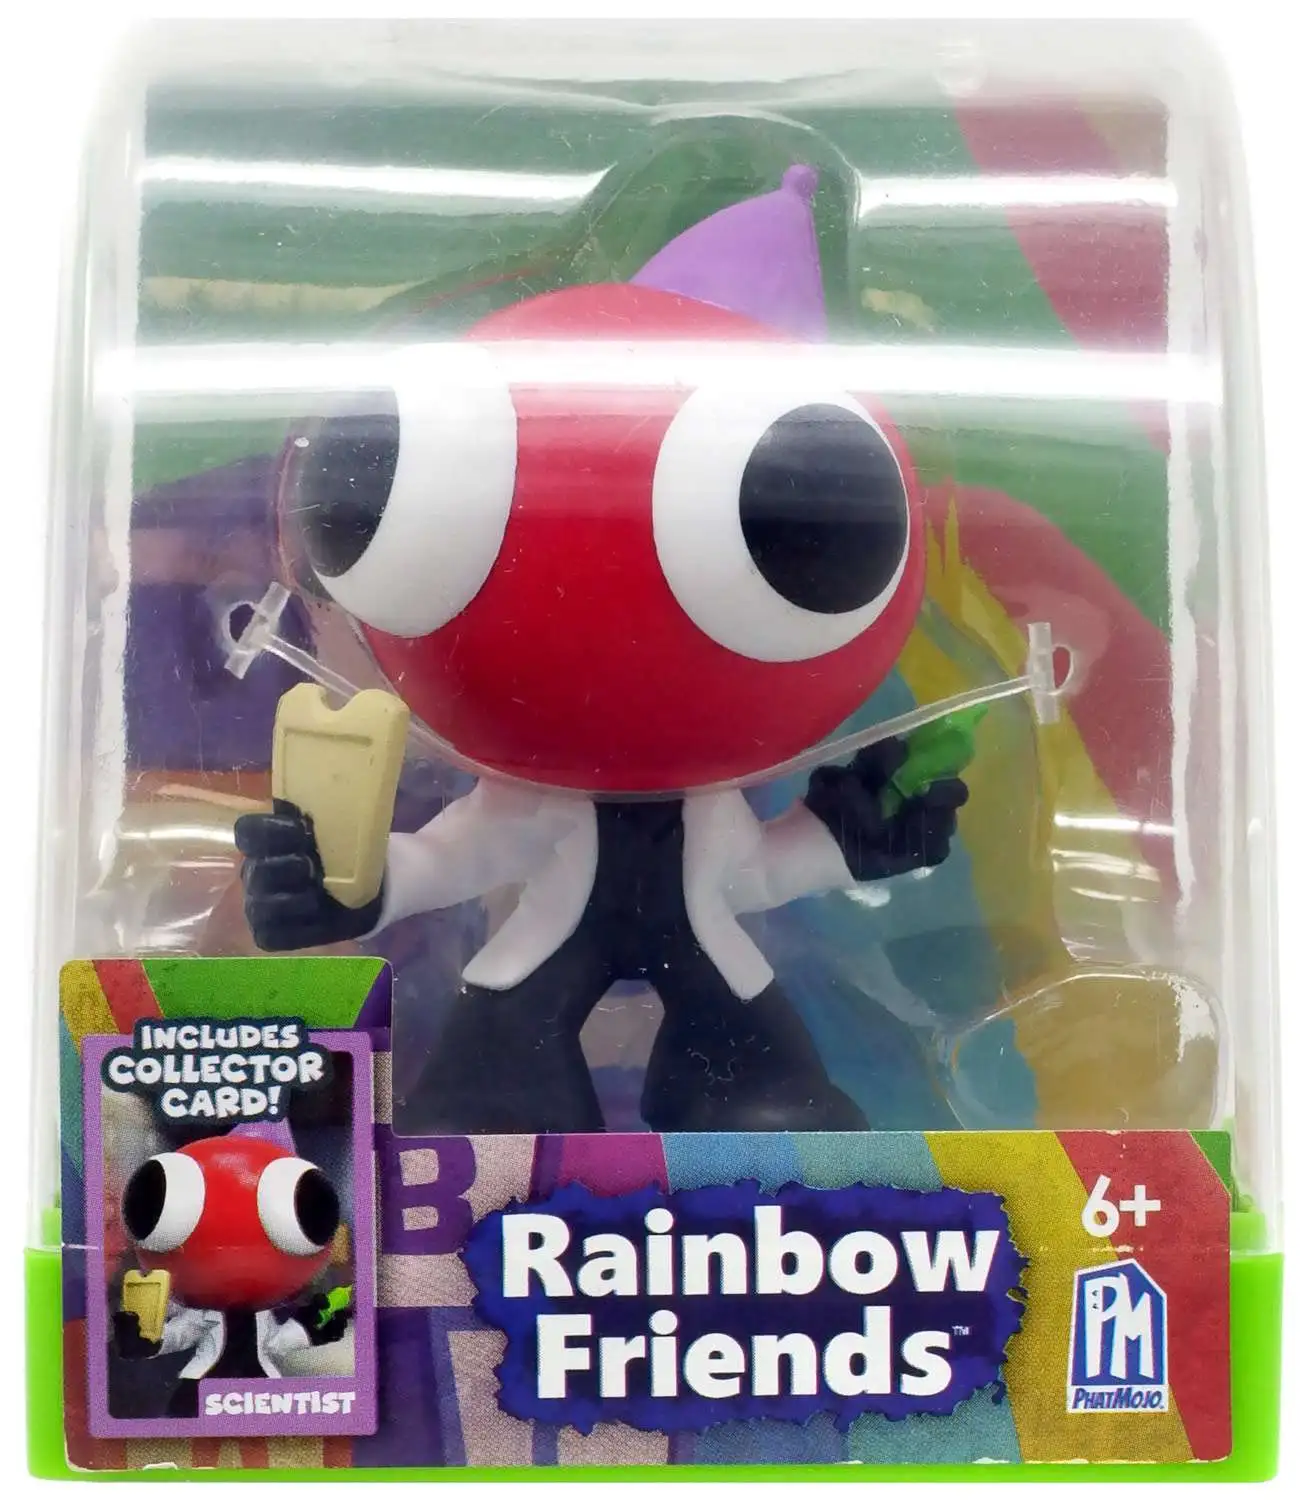 Rainbow Friends 8 Collectable Plush RED SCIENTIST Phat Mojo